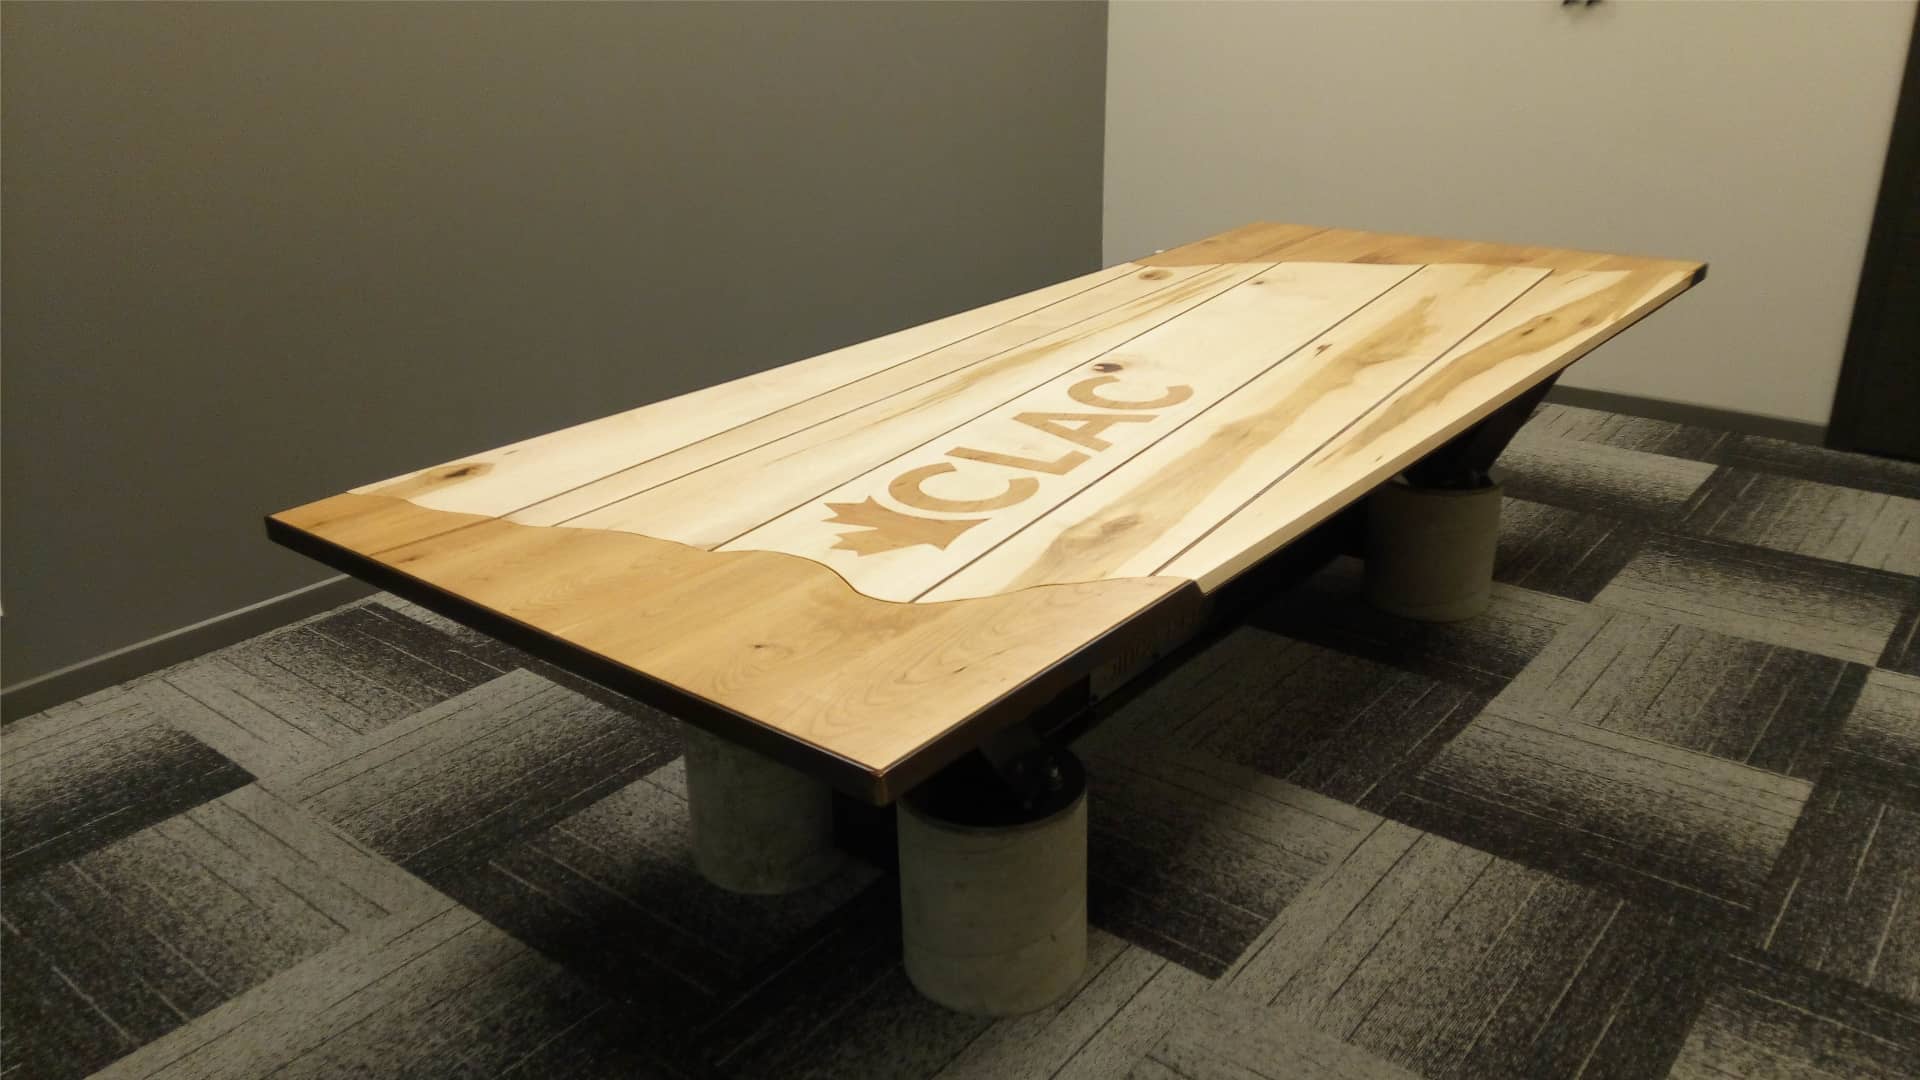 Wooden Top Boardroom Table with I-Beam Frame and Concrete Footings